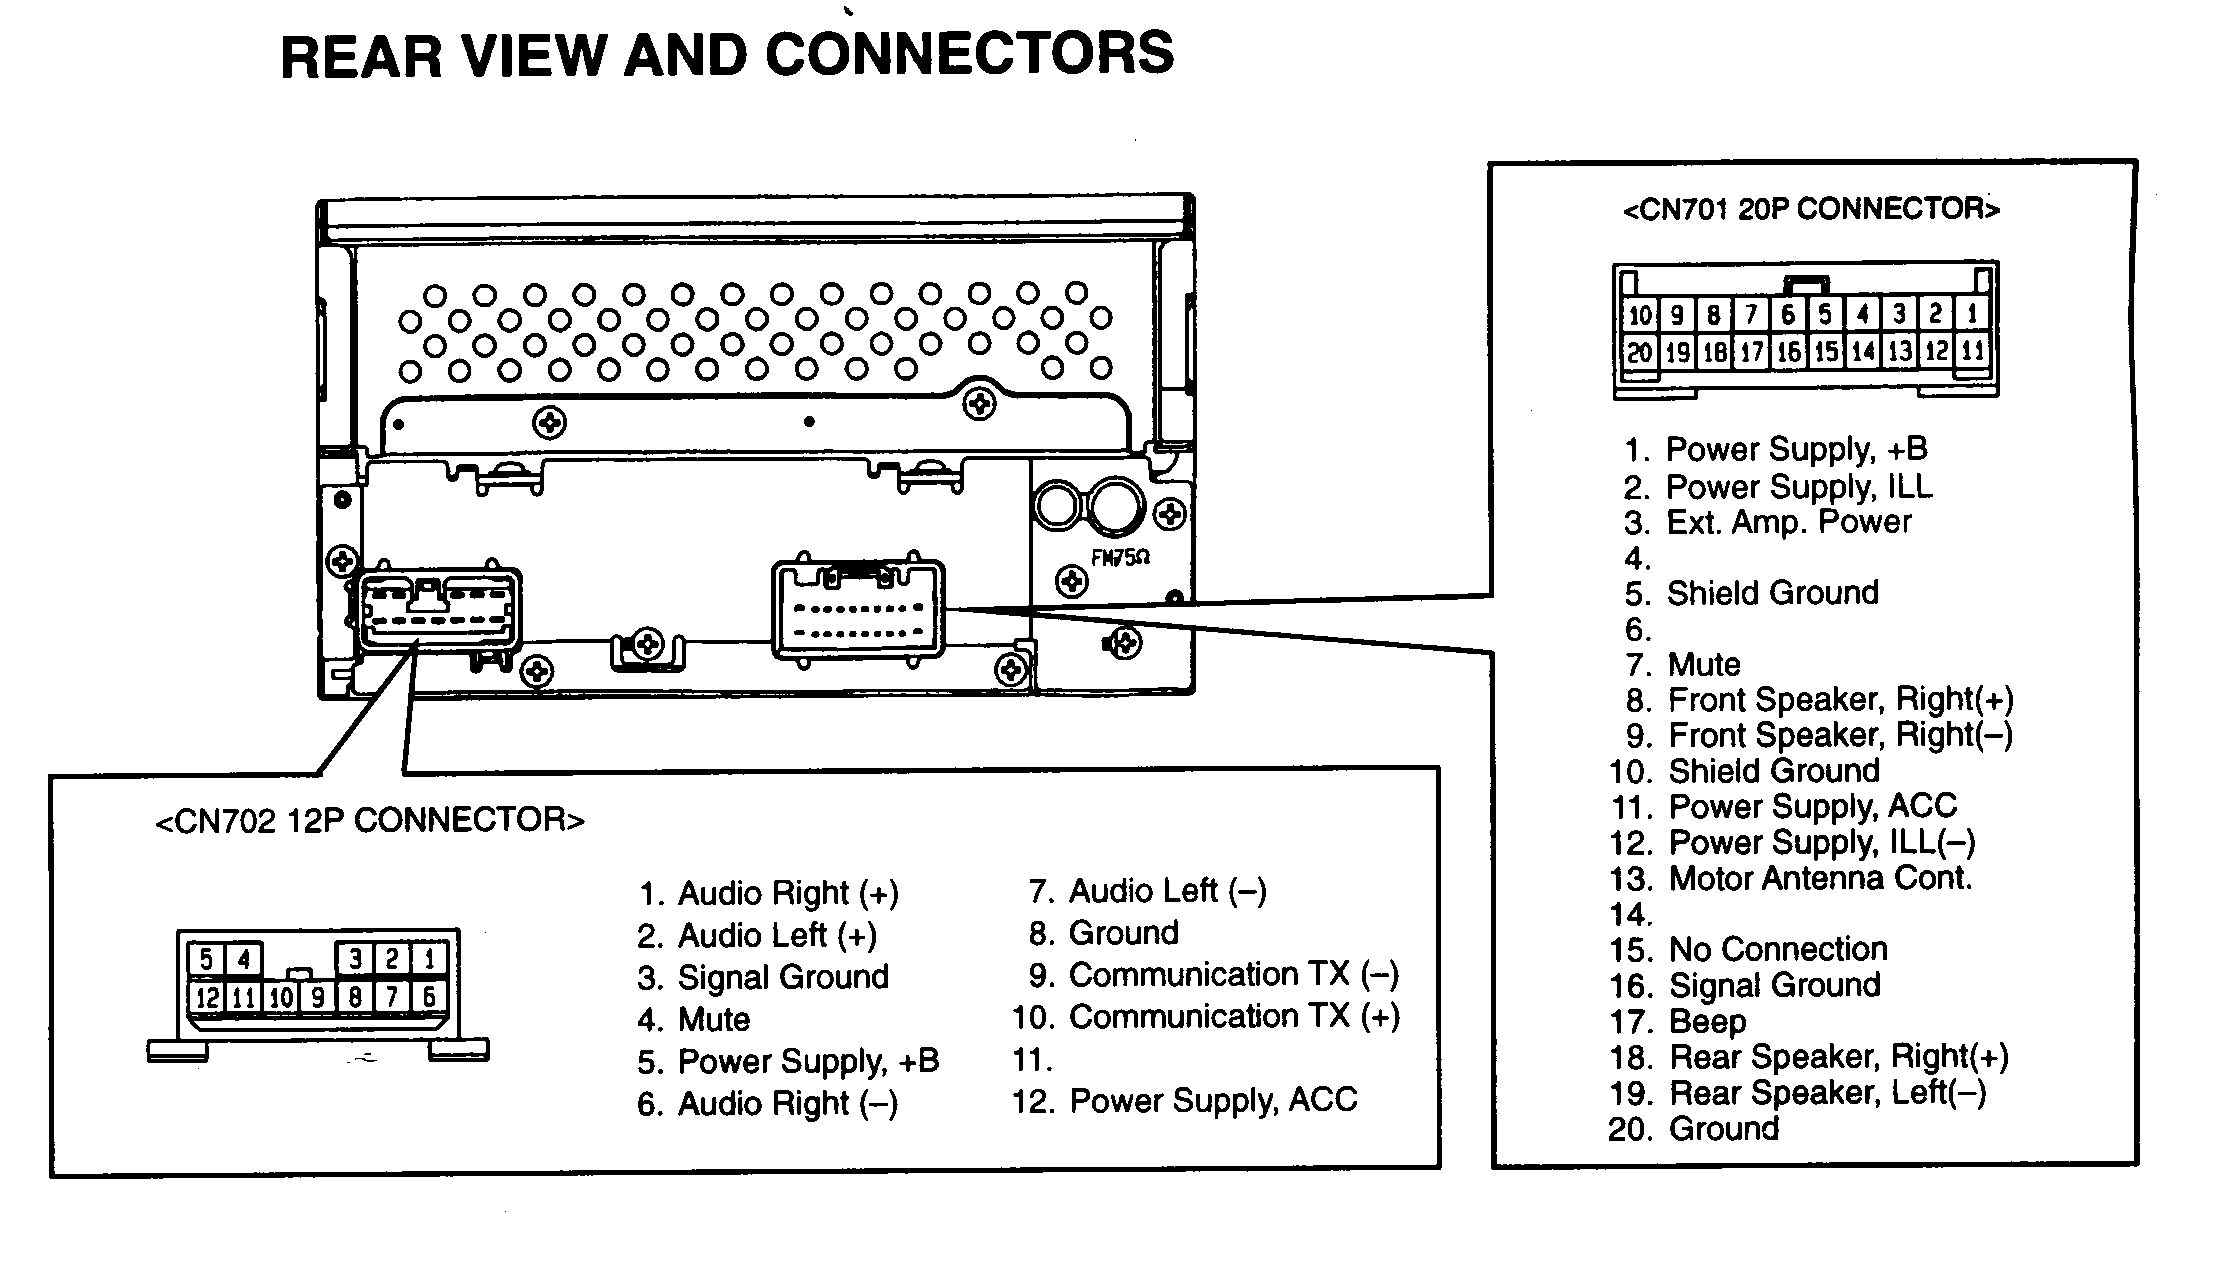 2004 Saturn Vue Stereo Wiring Diagram from carstereohelp.net